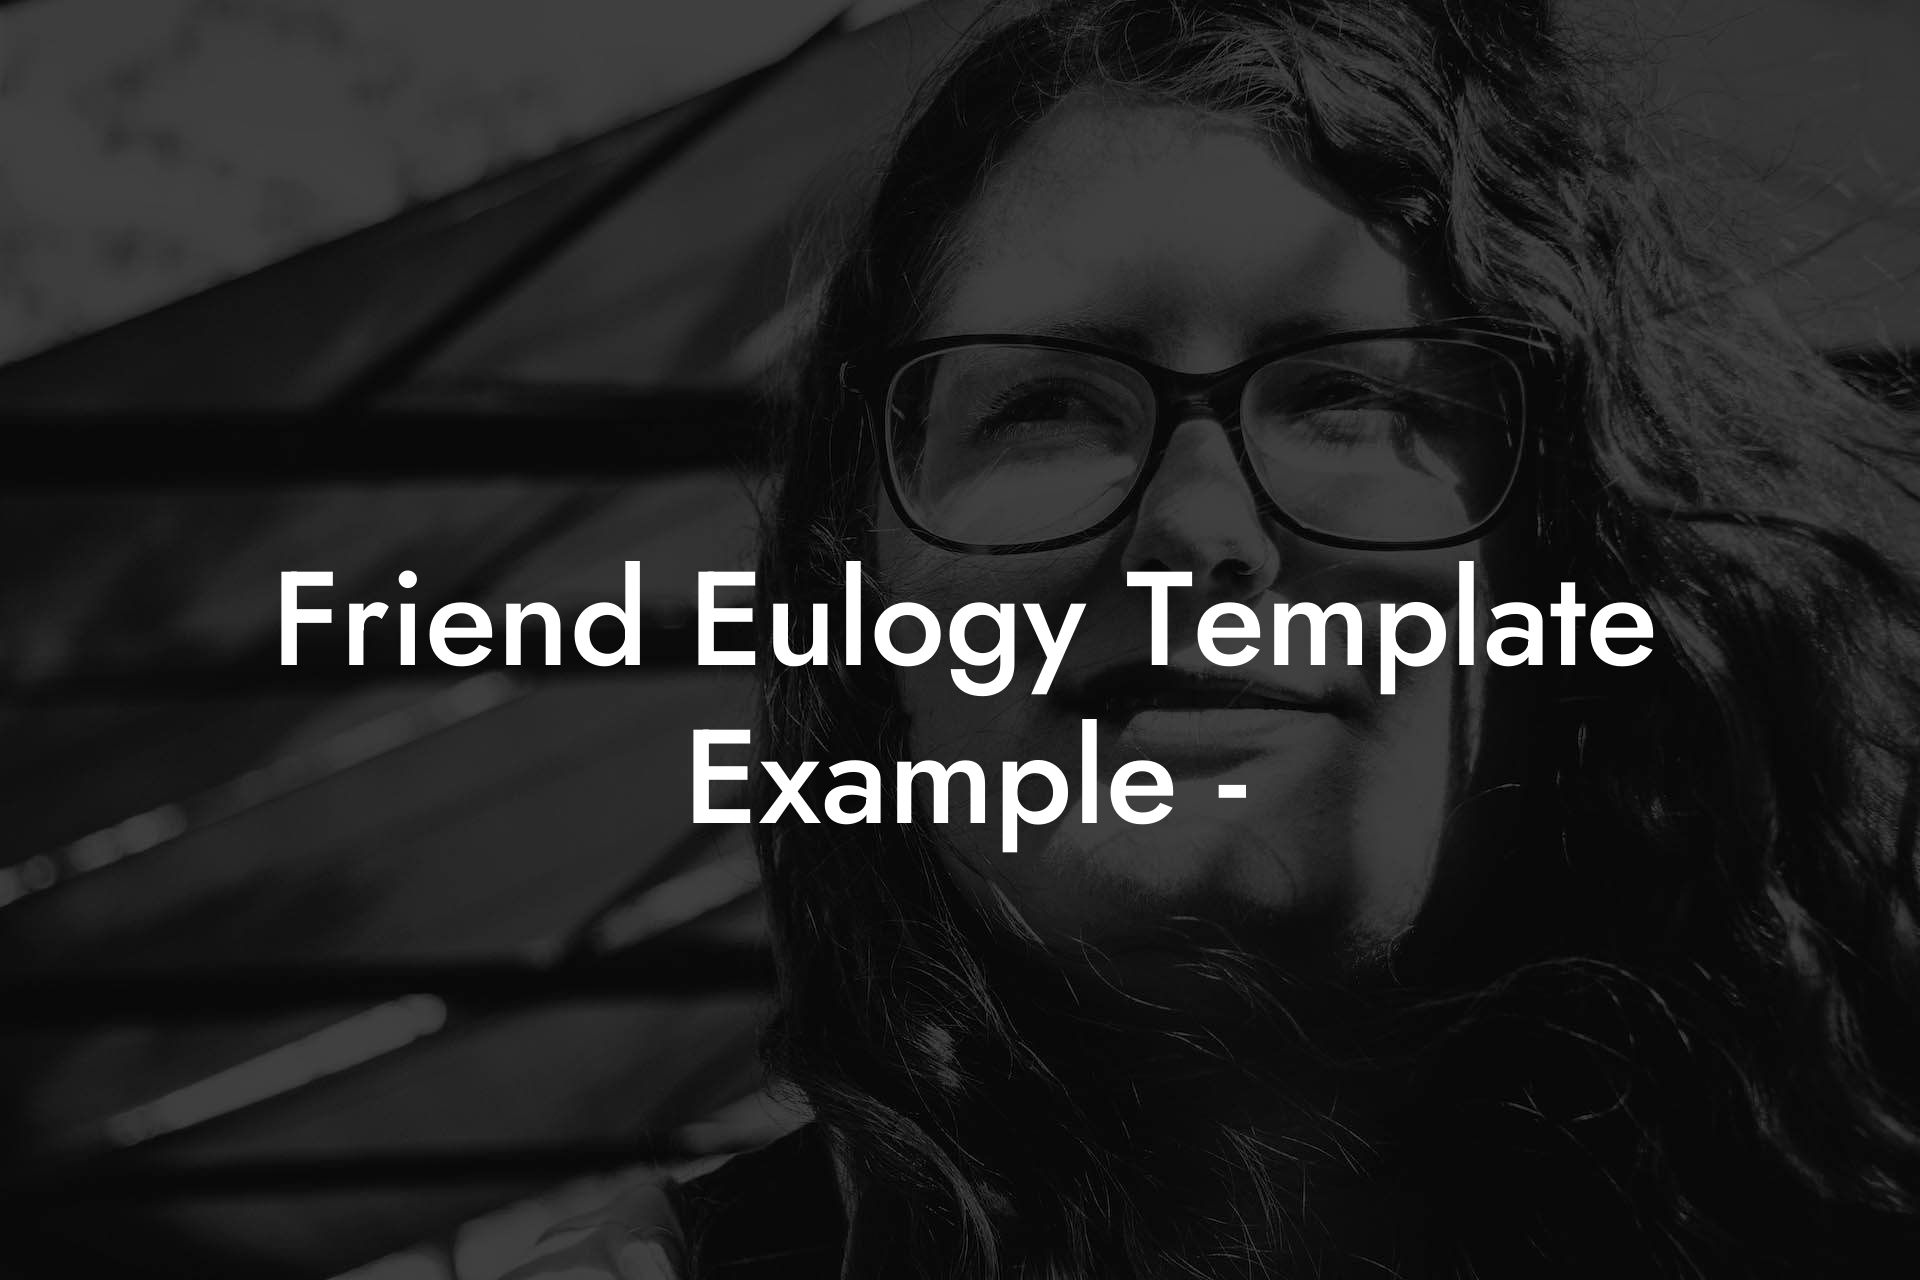 Friend Eulogy Template Example -